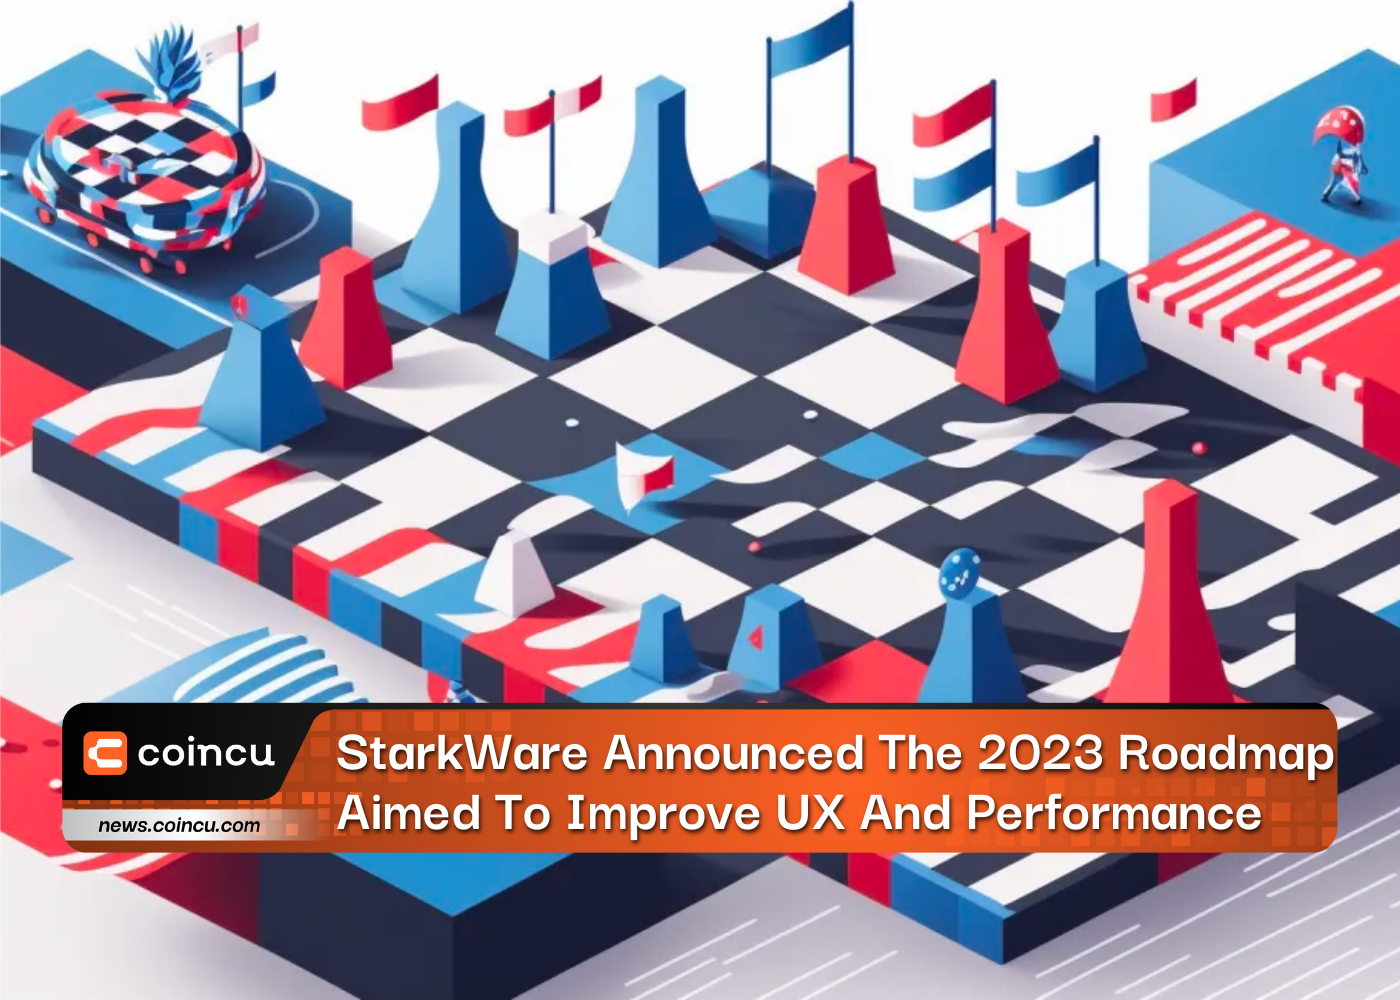 StarkWare Announced The 2023 Roadmap, Aimed To Improve UX And Performance